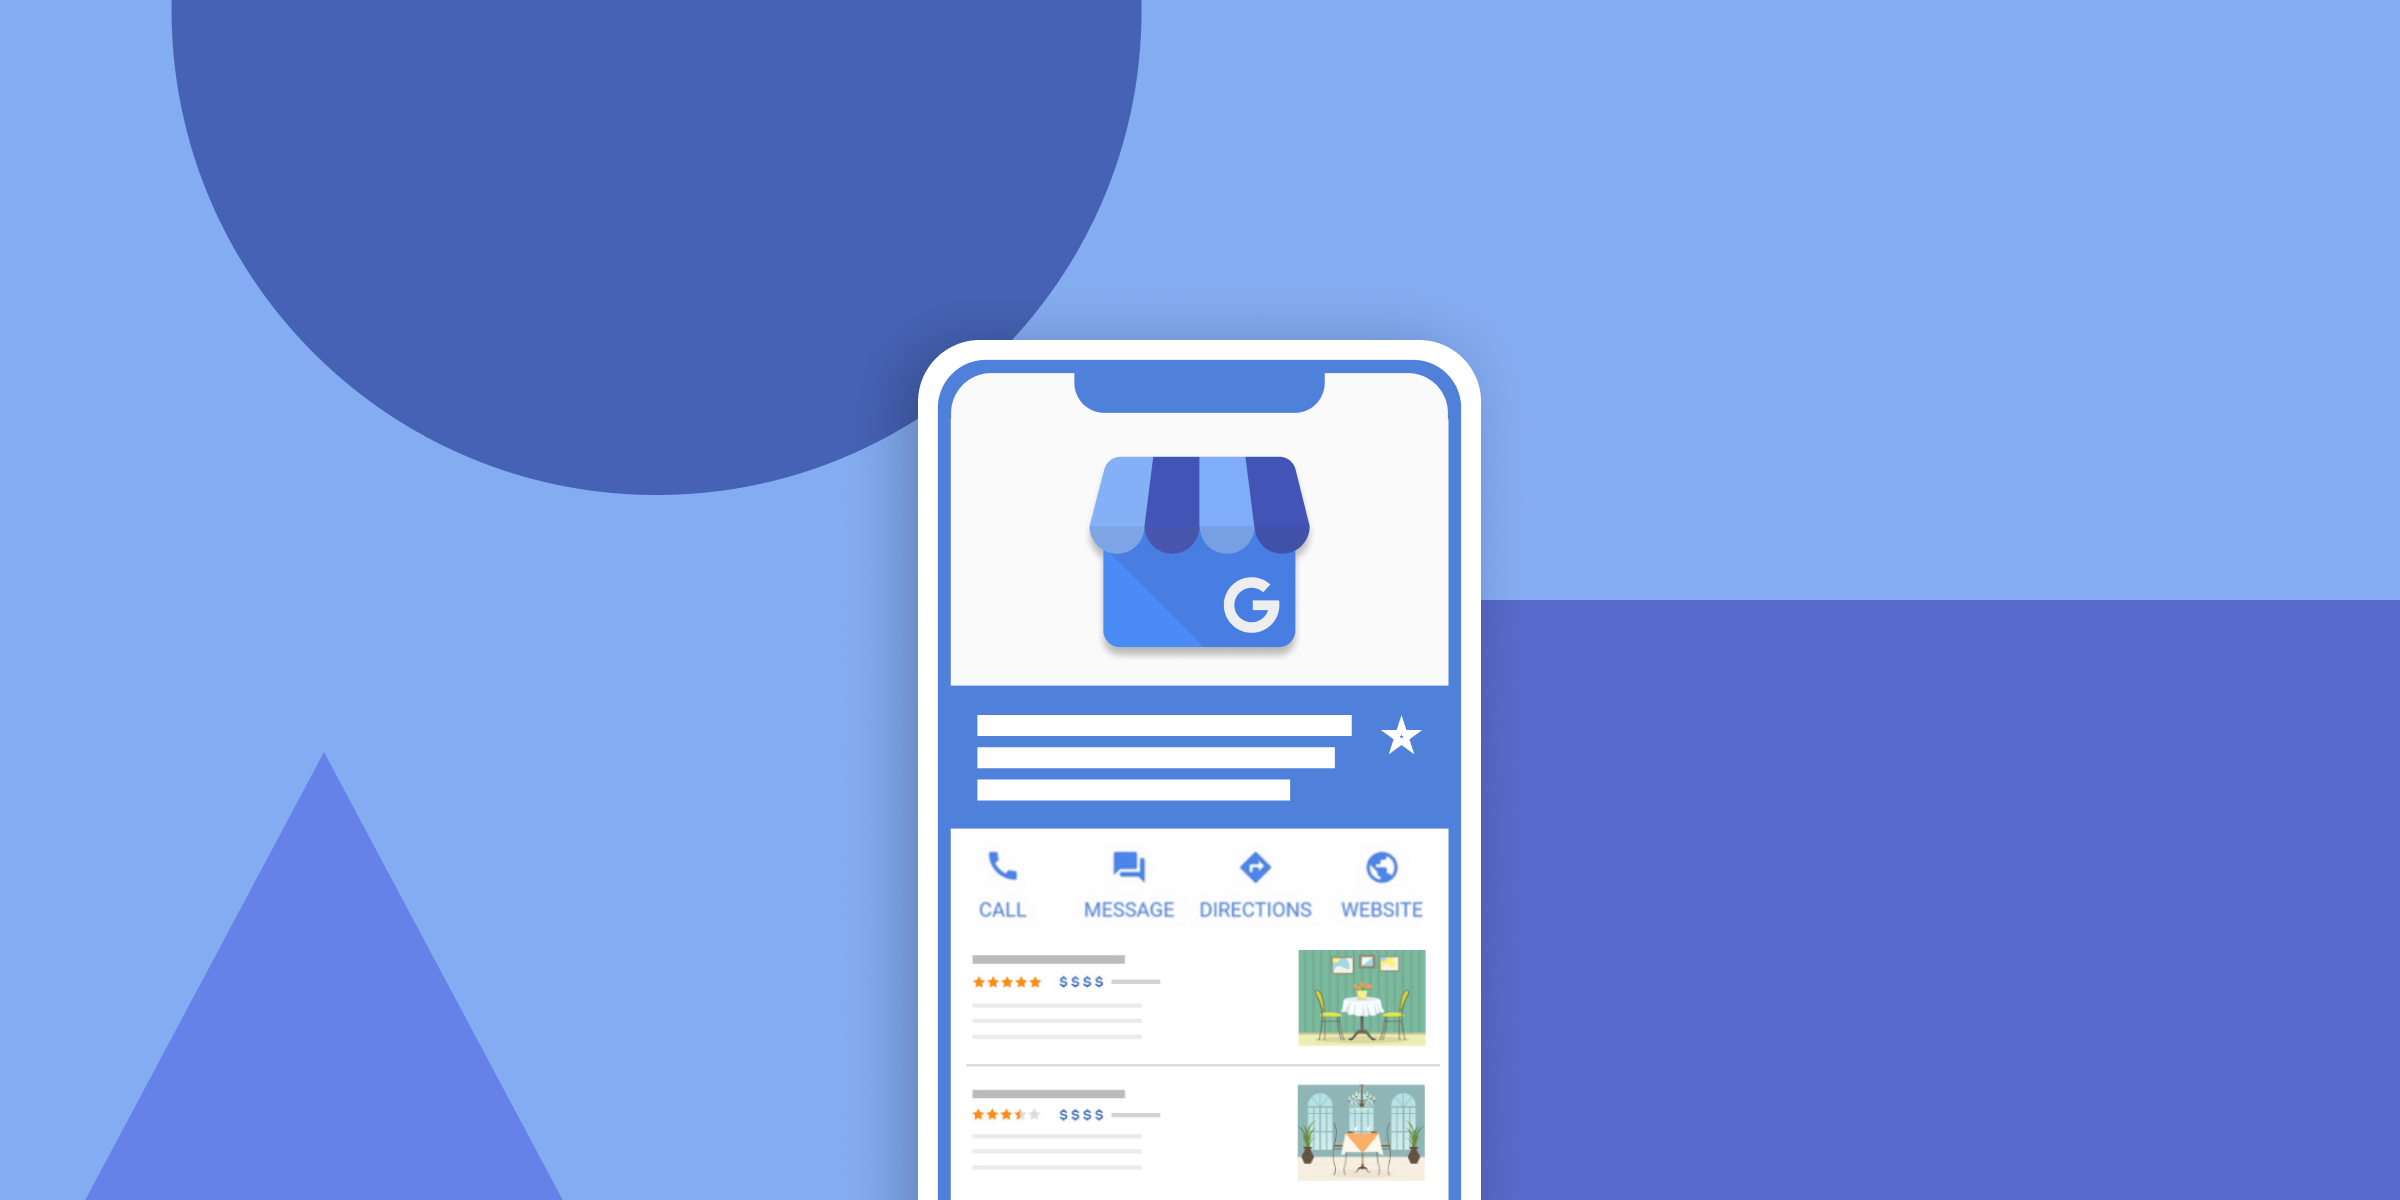 Google My Business – All You Need to Know